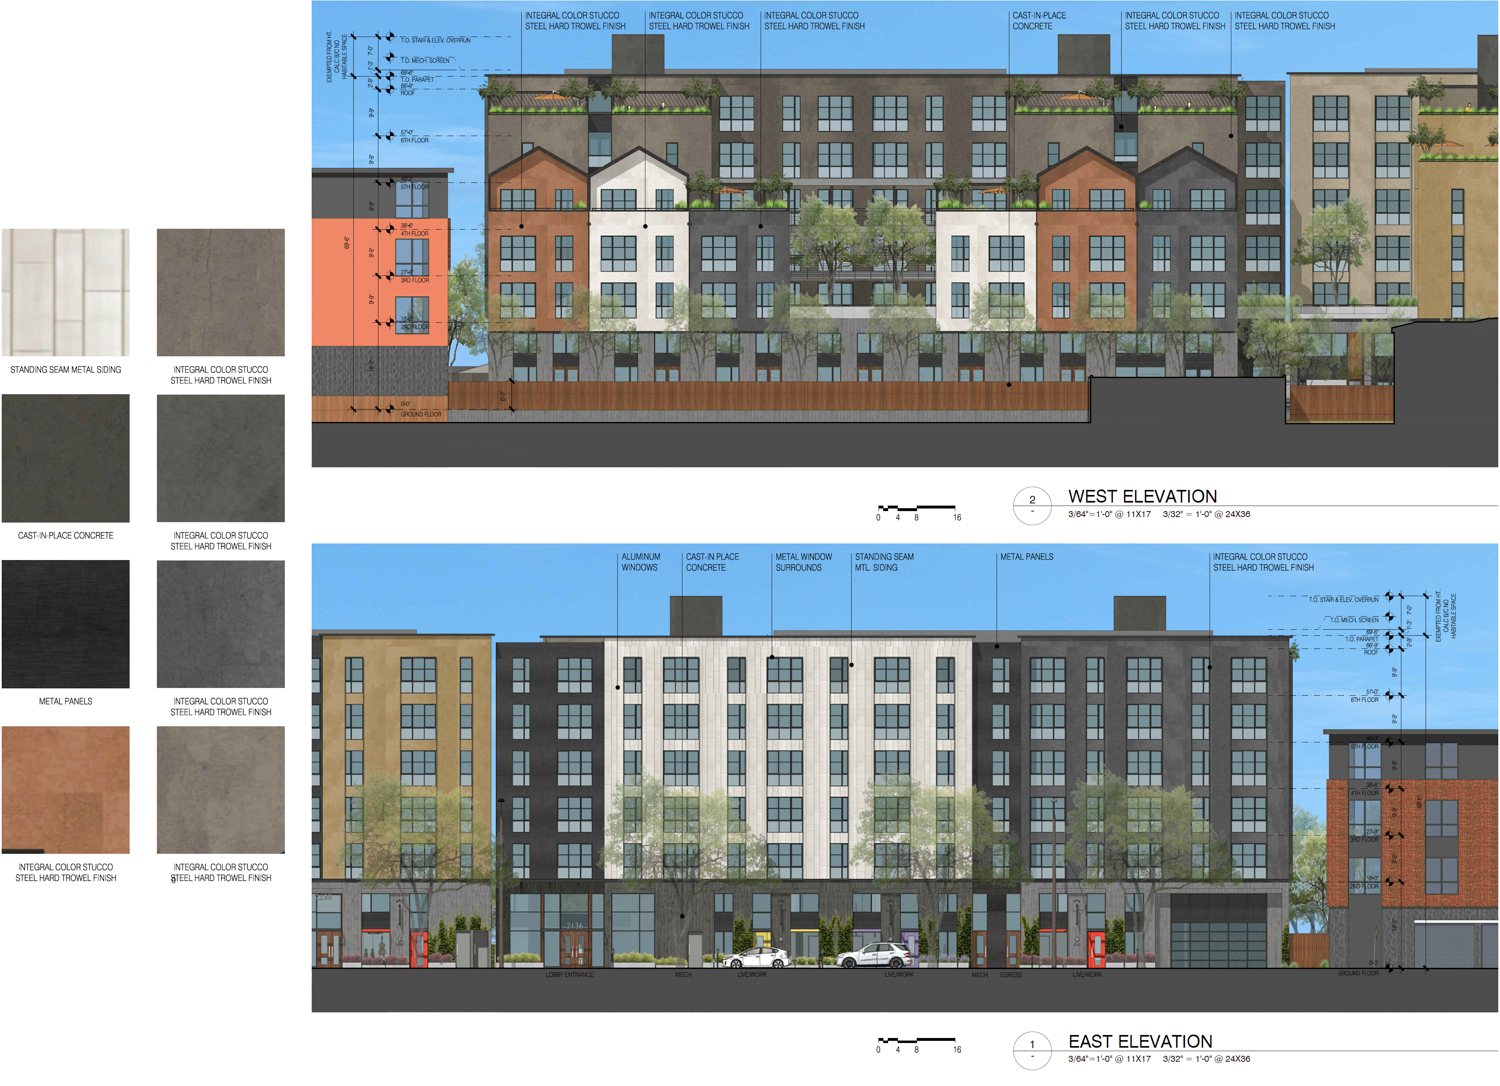 2136 San Pablo Avenue elevations of the West and East facades, illustration by Trachtenberg Architects